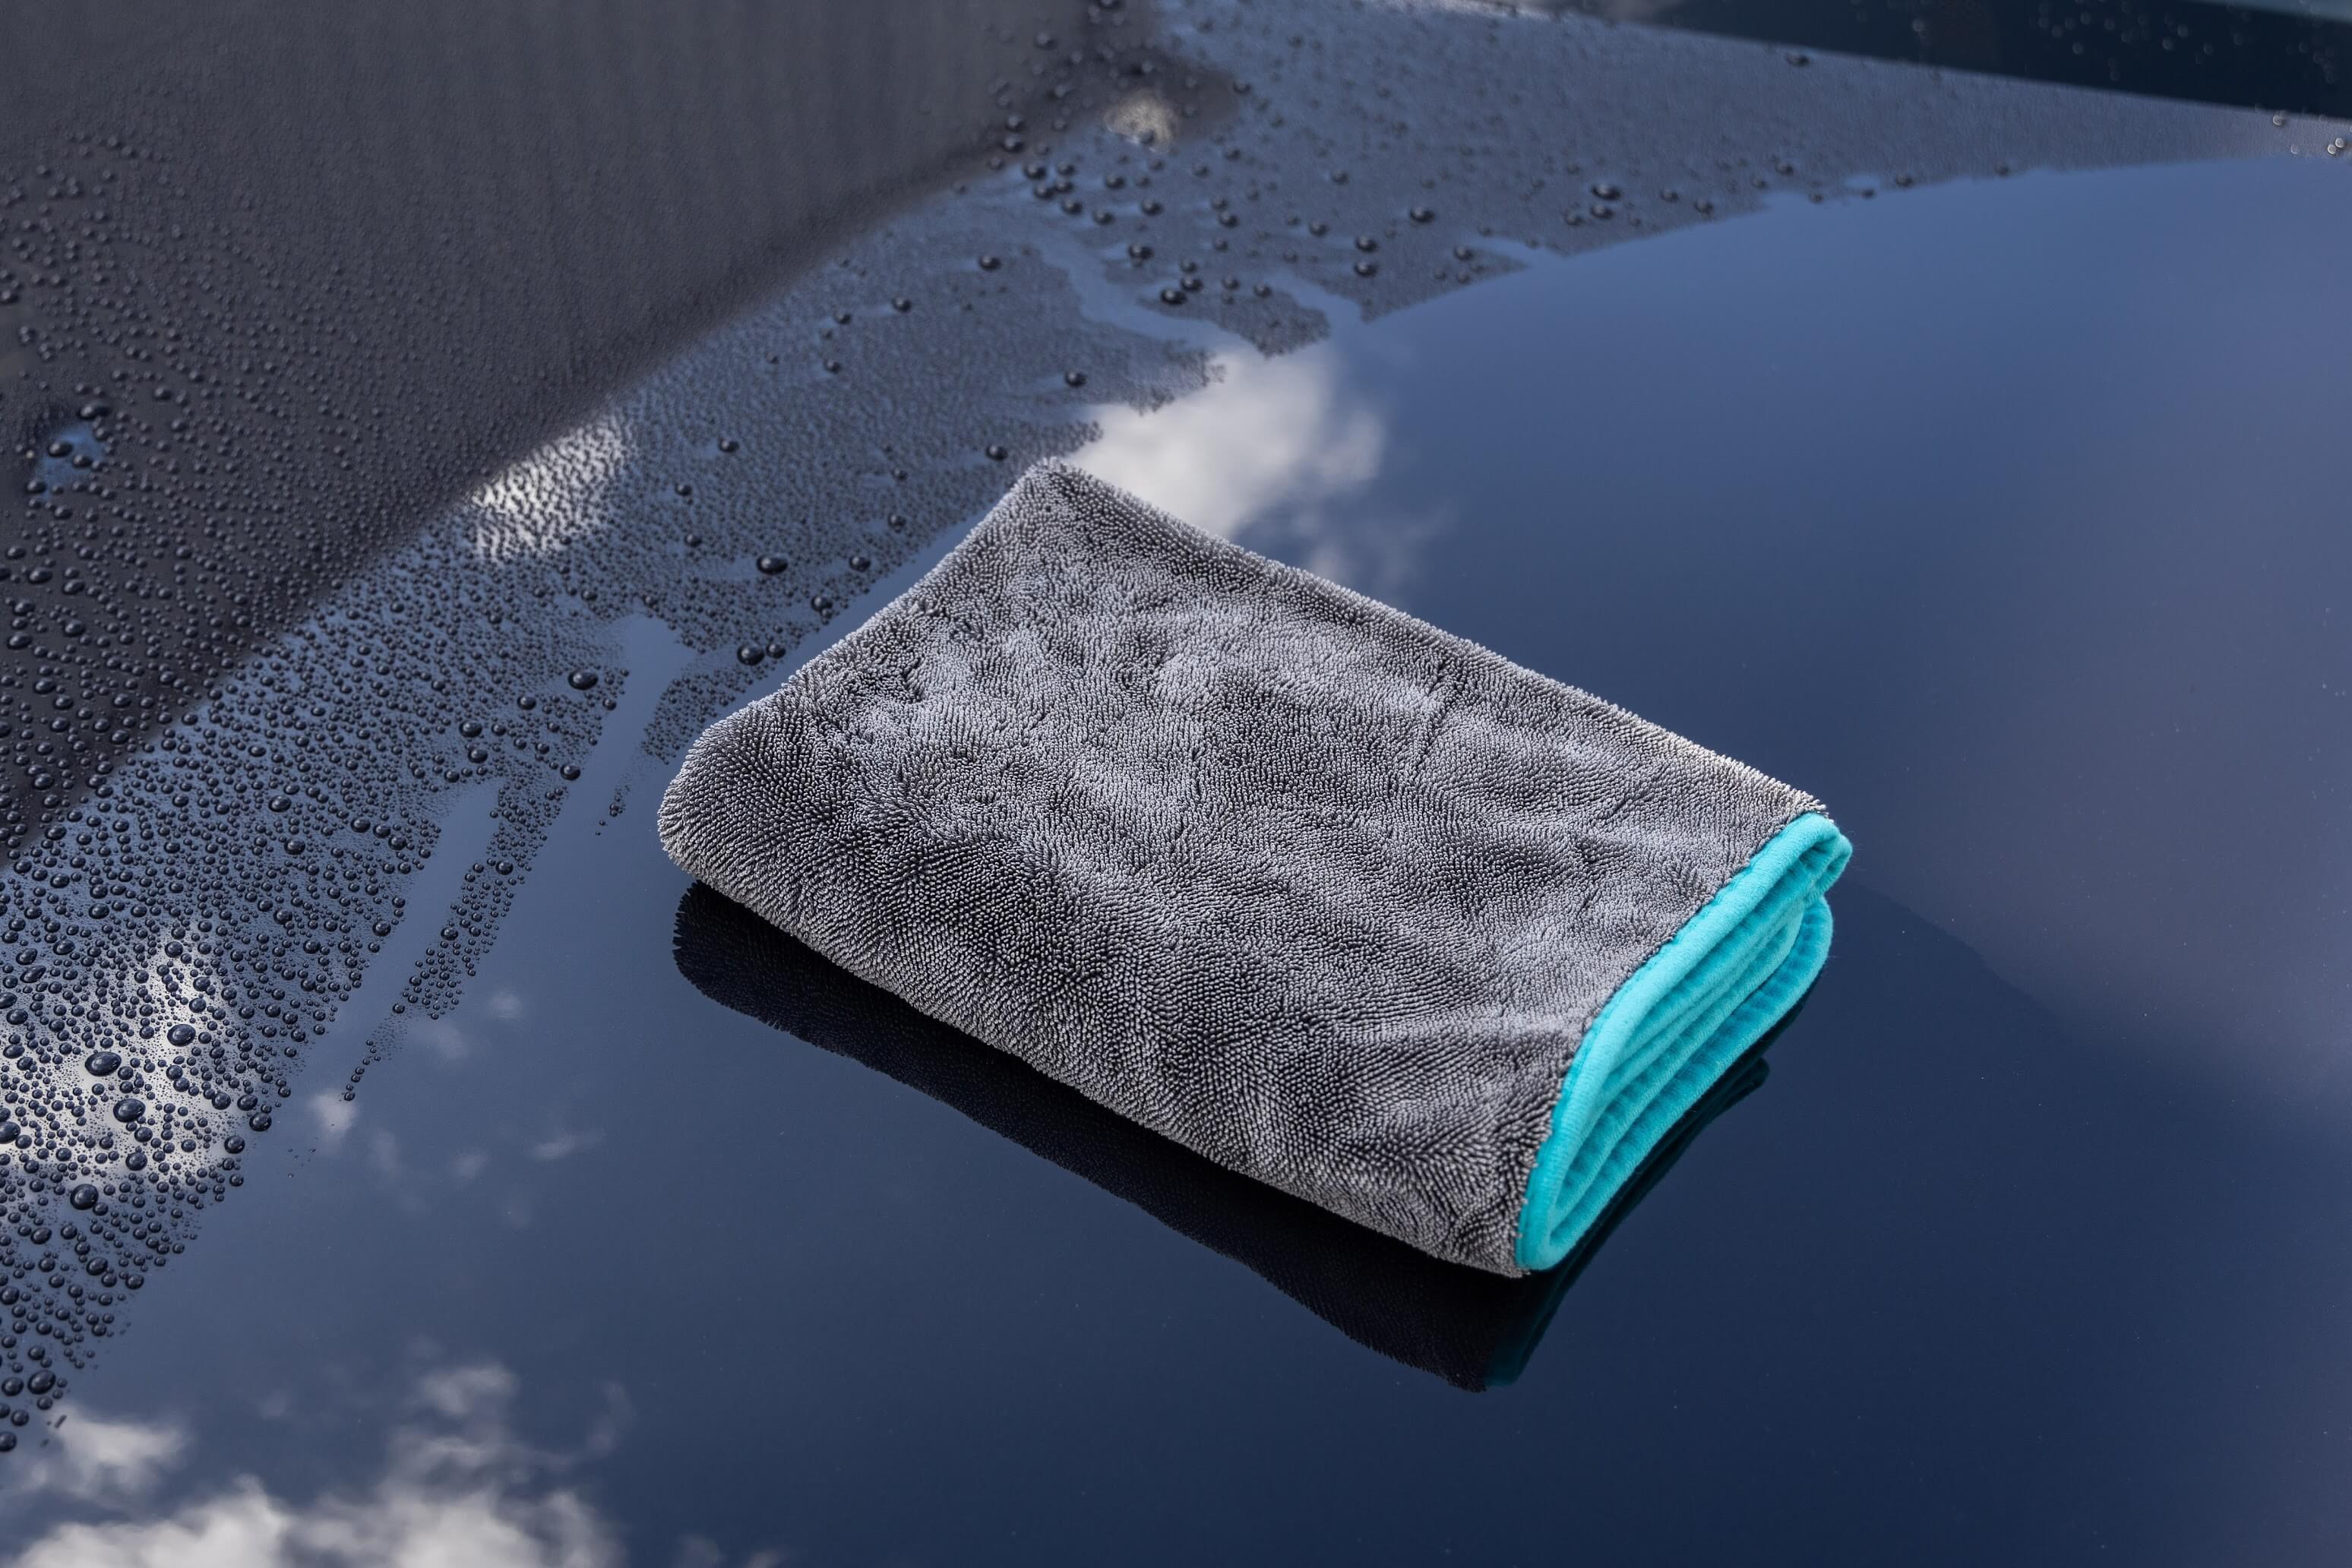 Auto Finesse | Silk Drying Towel - Complete With Scratch-Less, Micro Suede Edging